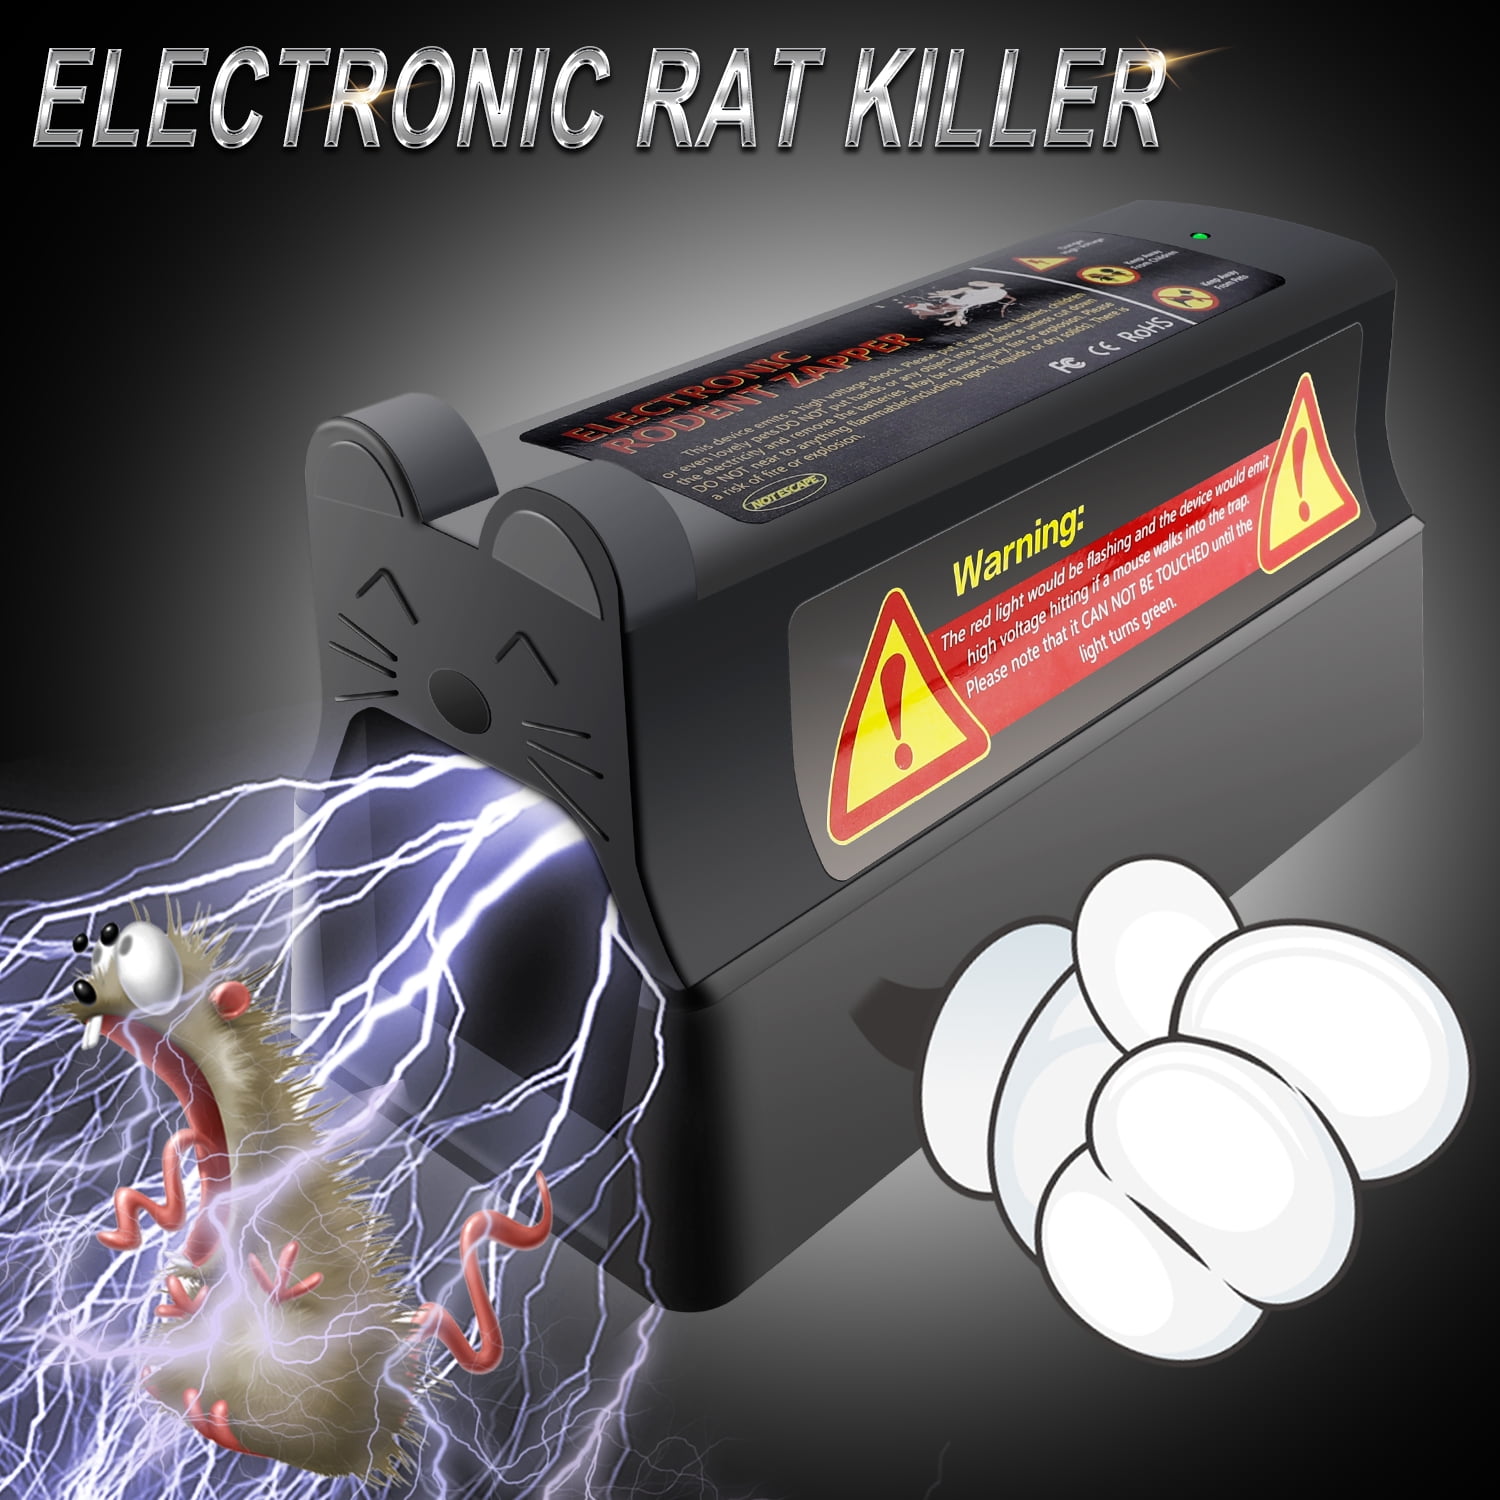 Electronic Mouse Mice Rat Zapper Rodent Trap Killer Pest Control Home Garden US 